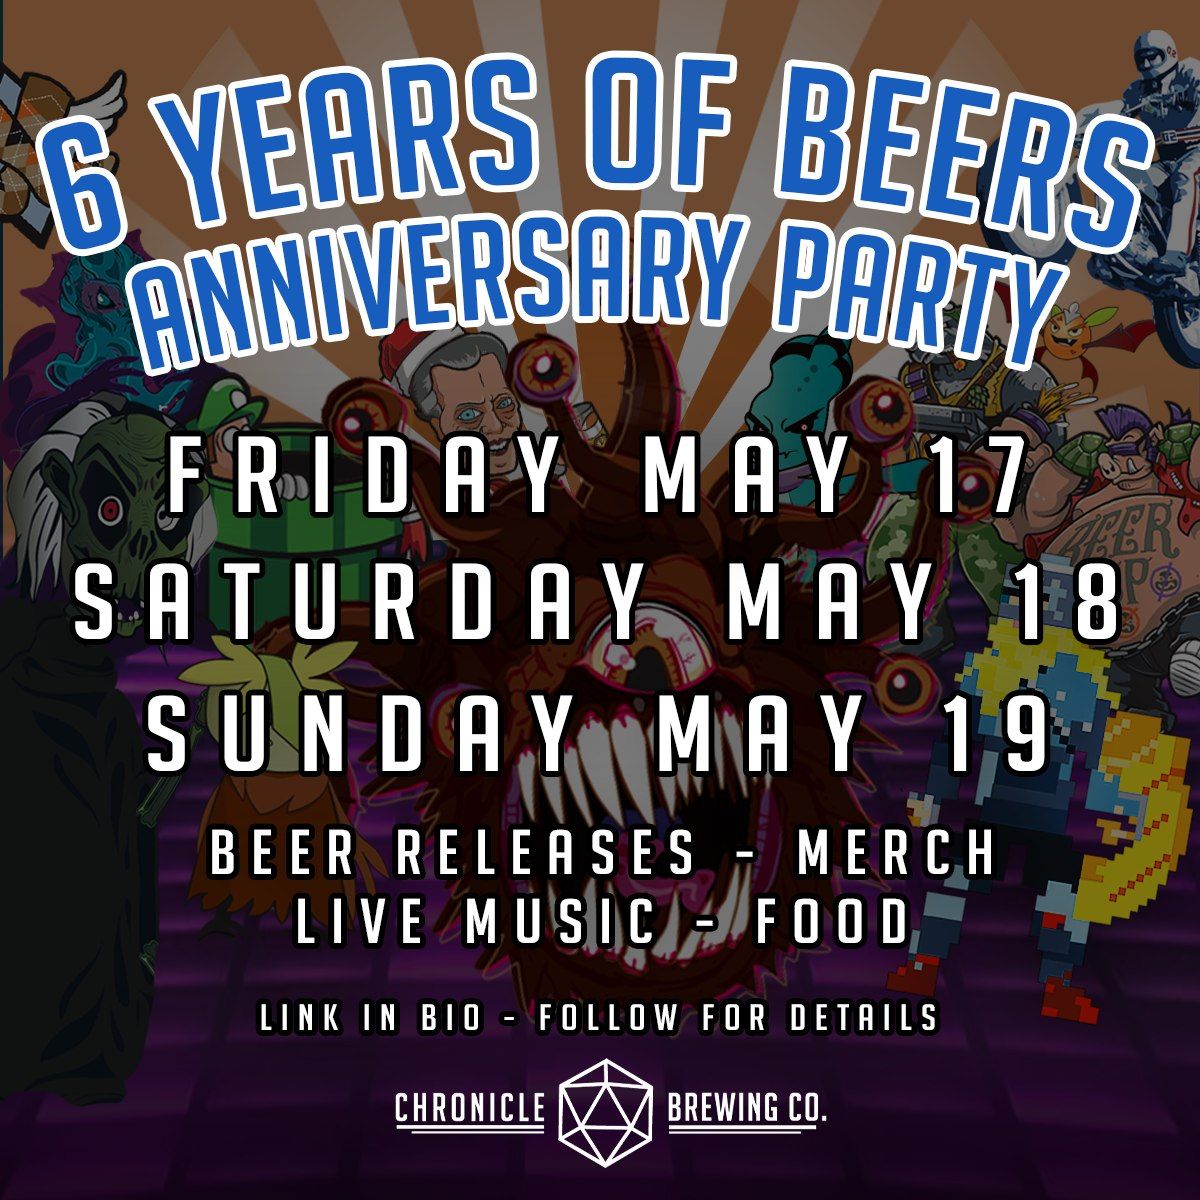 6th Anniversary Party!